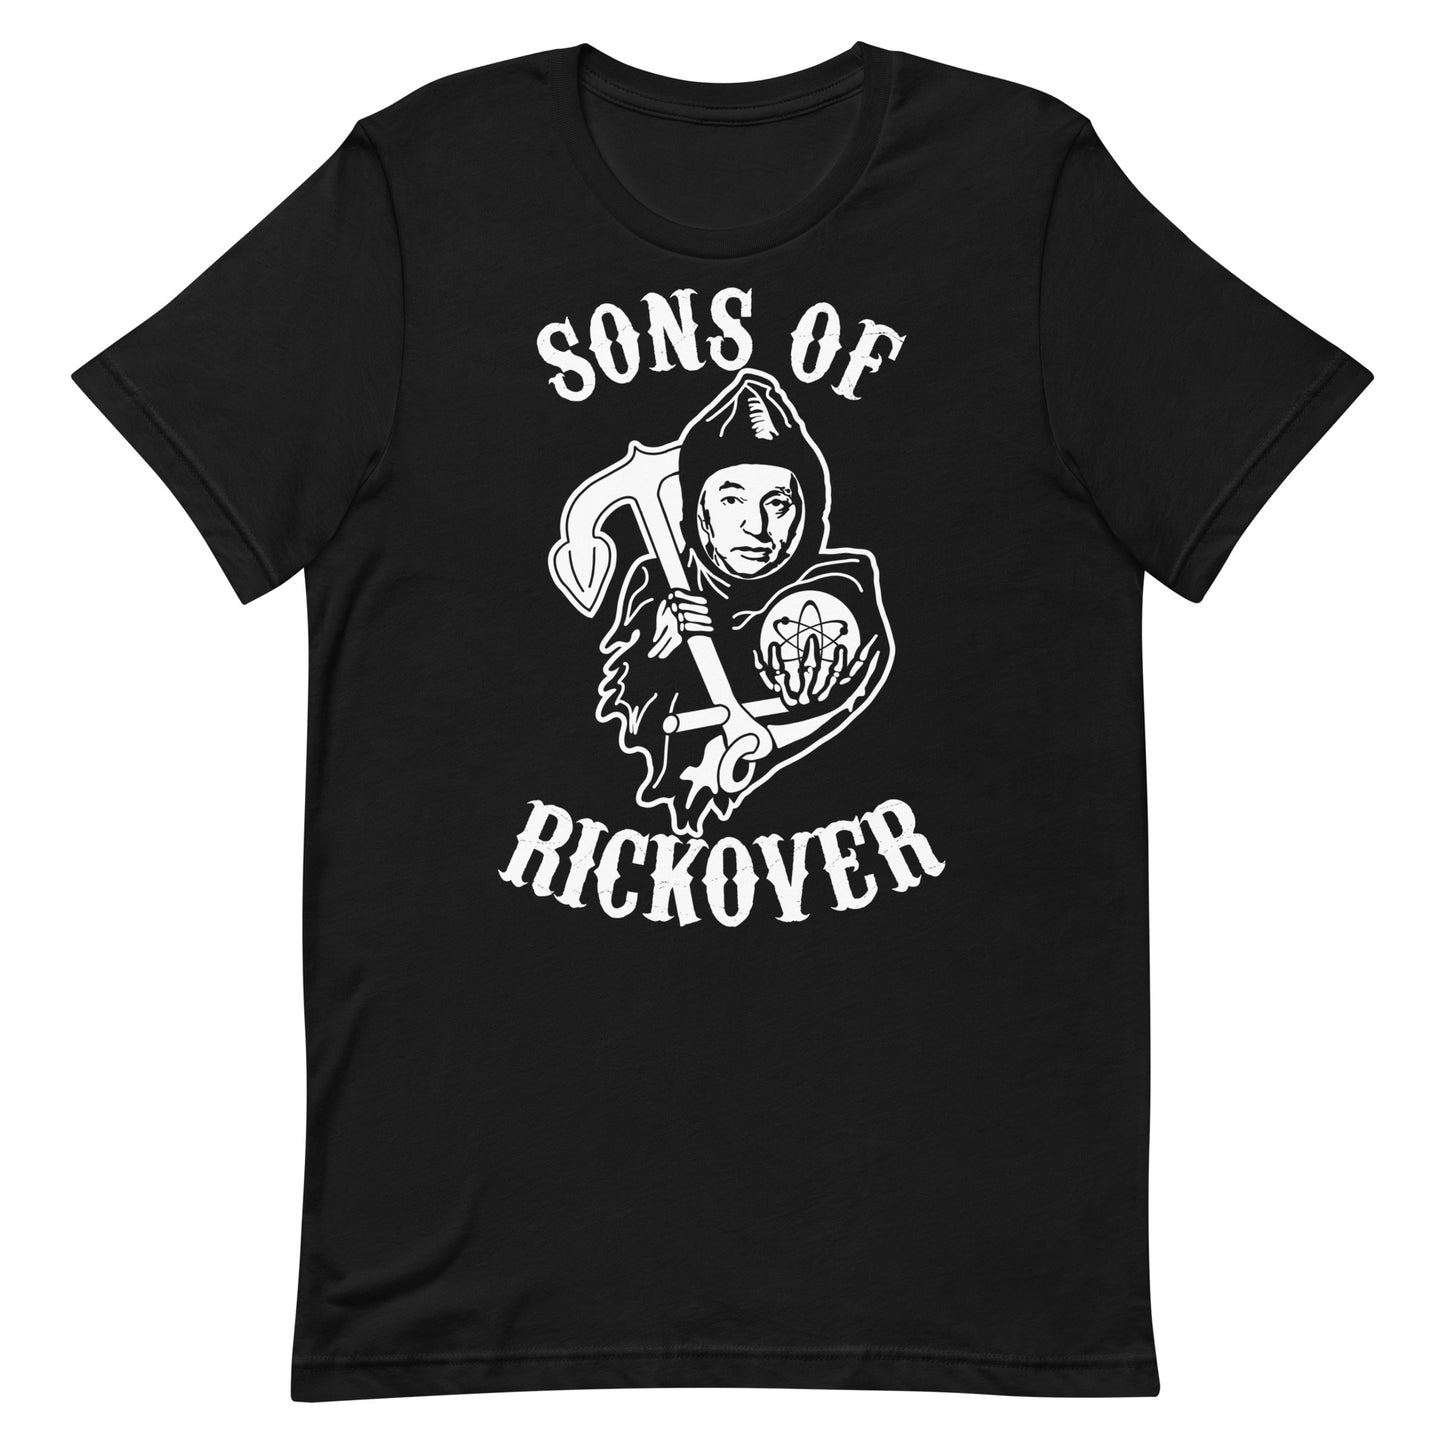 Sons of Rickover Tee